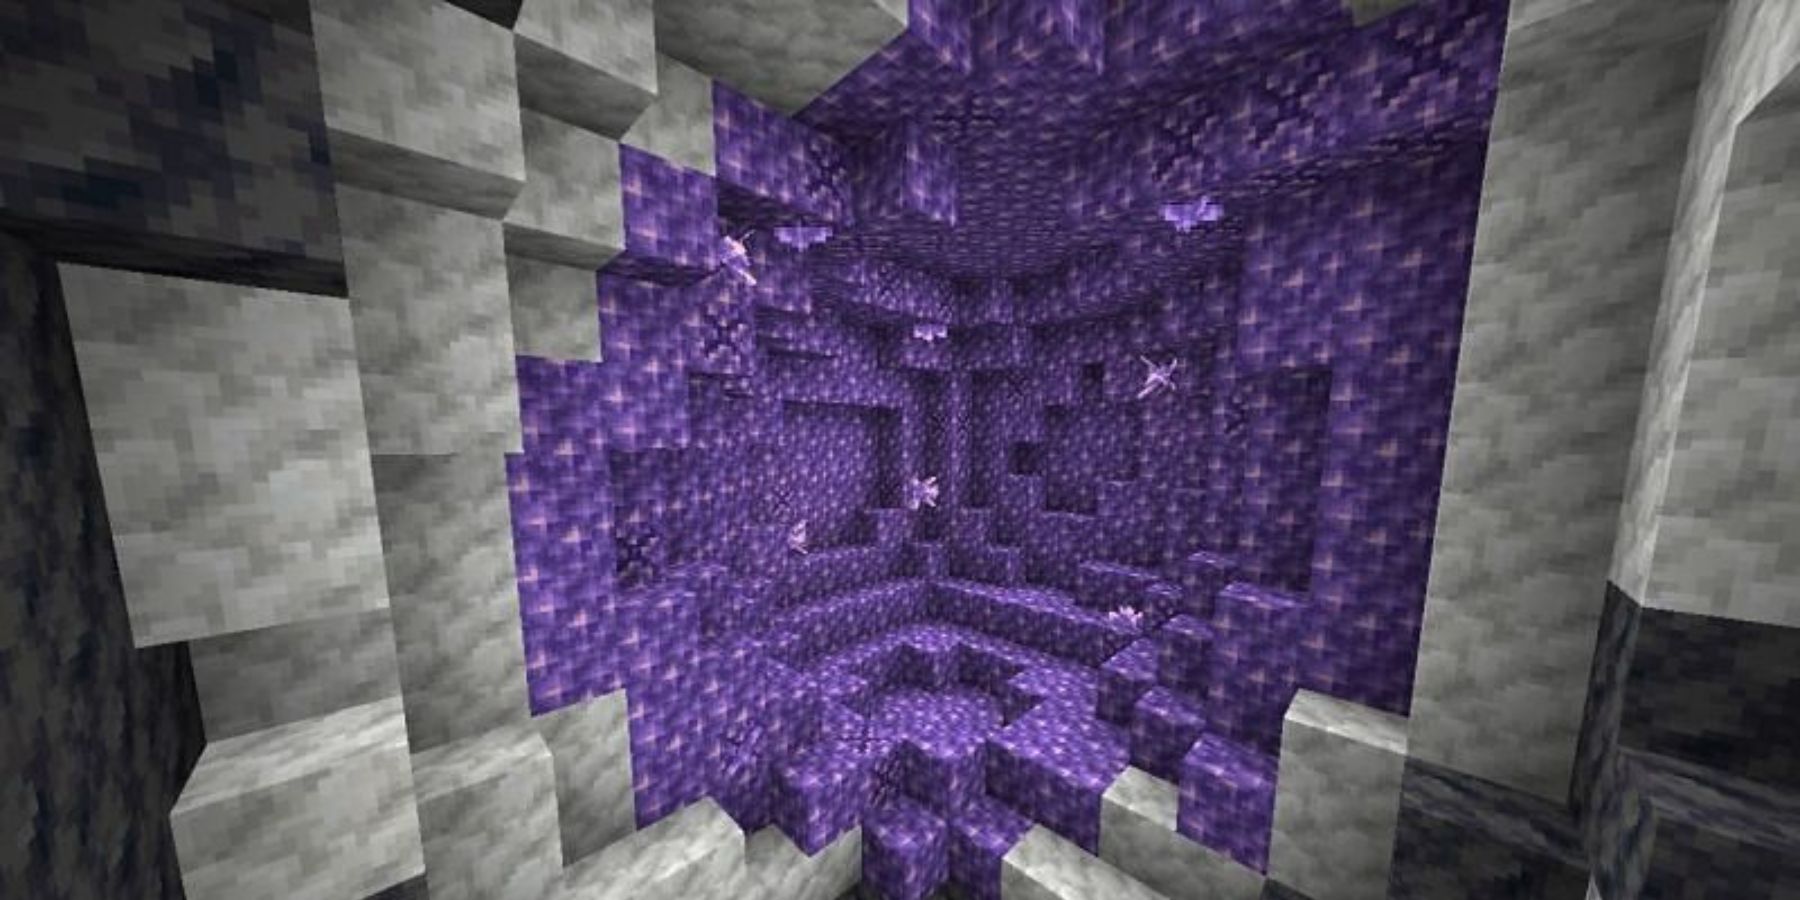 10 Things You Didnt Know About Minecrafts Caves & Cliffs Update Part 1